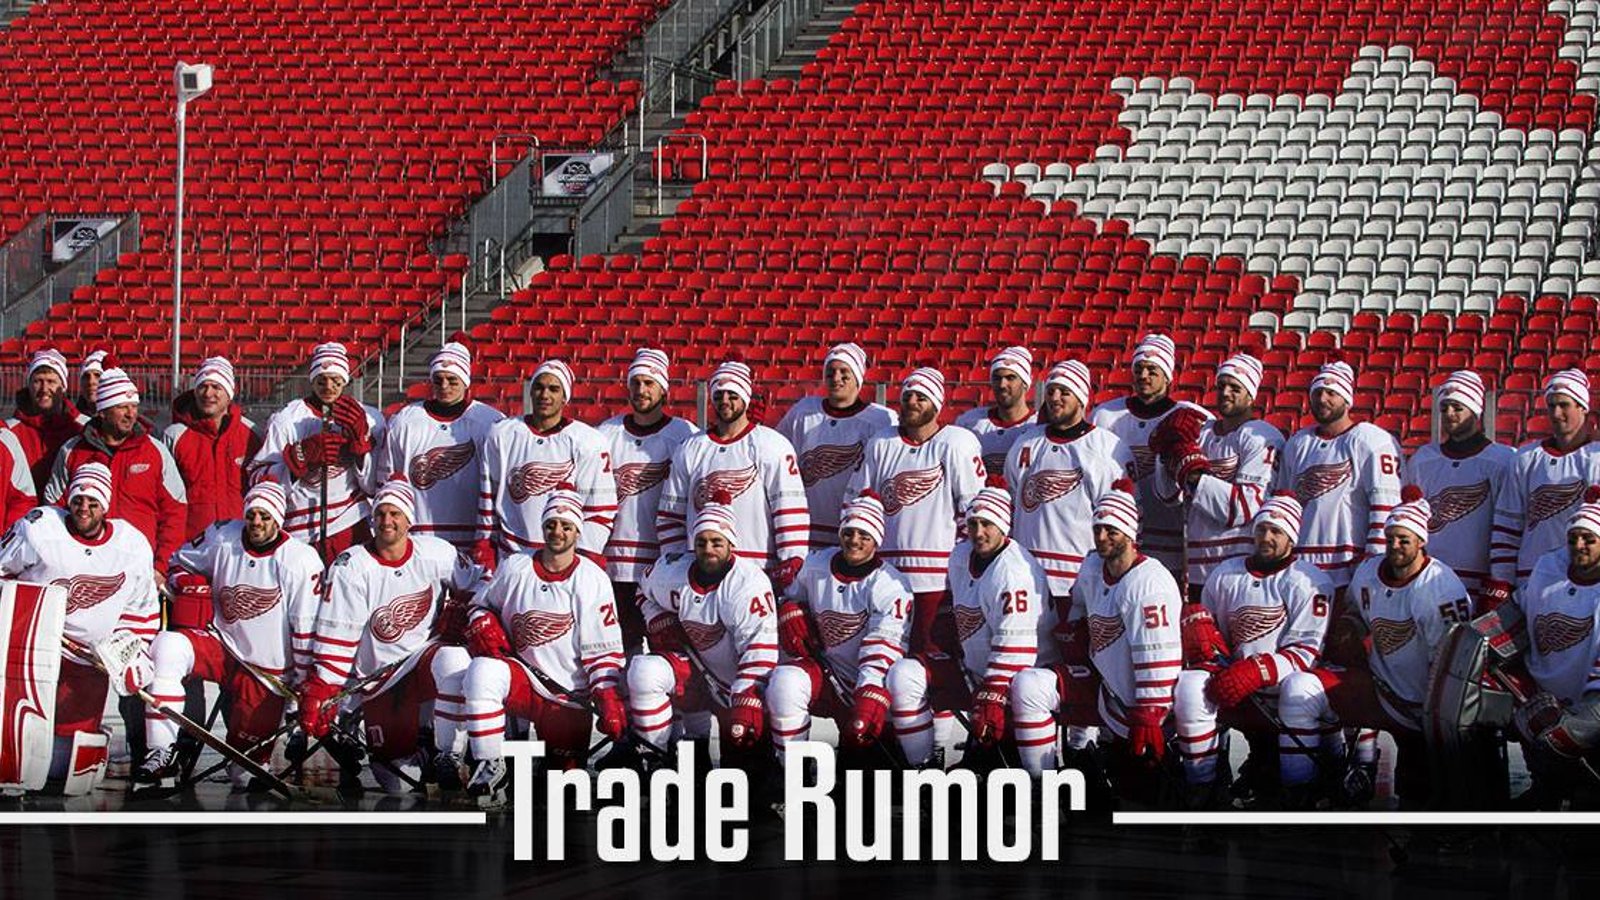 Wings veteran consistently being mentioned in trade rumors.